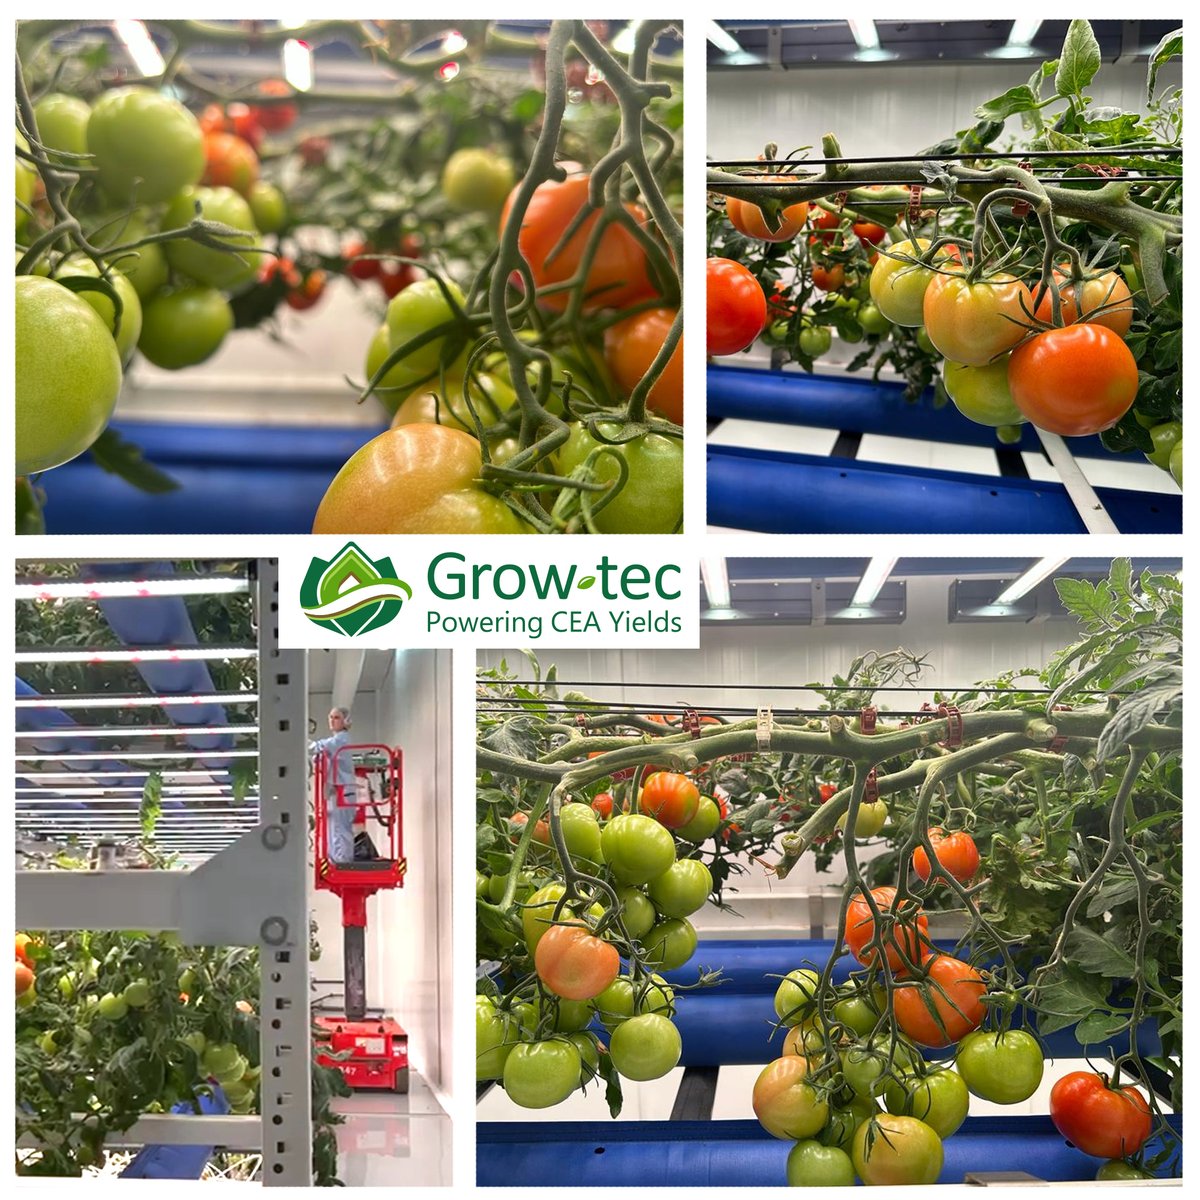 Join us in #revolutionizing the #tomato #industry and #cultivating a more #sustainable, flavorful #future! 🌍🌿
#IndoorAg #TomatoCultivation #SustainableAgriculture #AgTech #Innovation #YearRoundHarvest #InnovativeFarming #MaximumYield
#IndoorFarming #VerticalFarming #Tomatoes